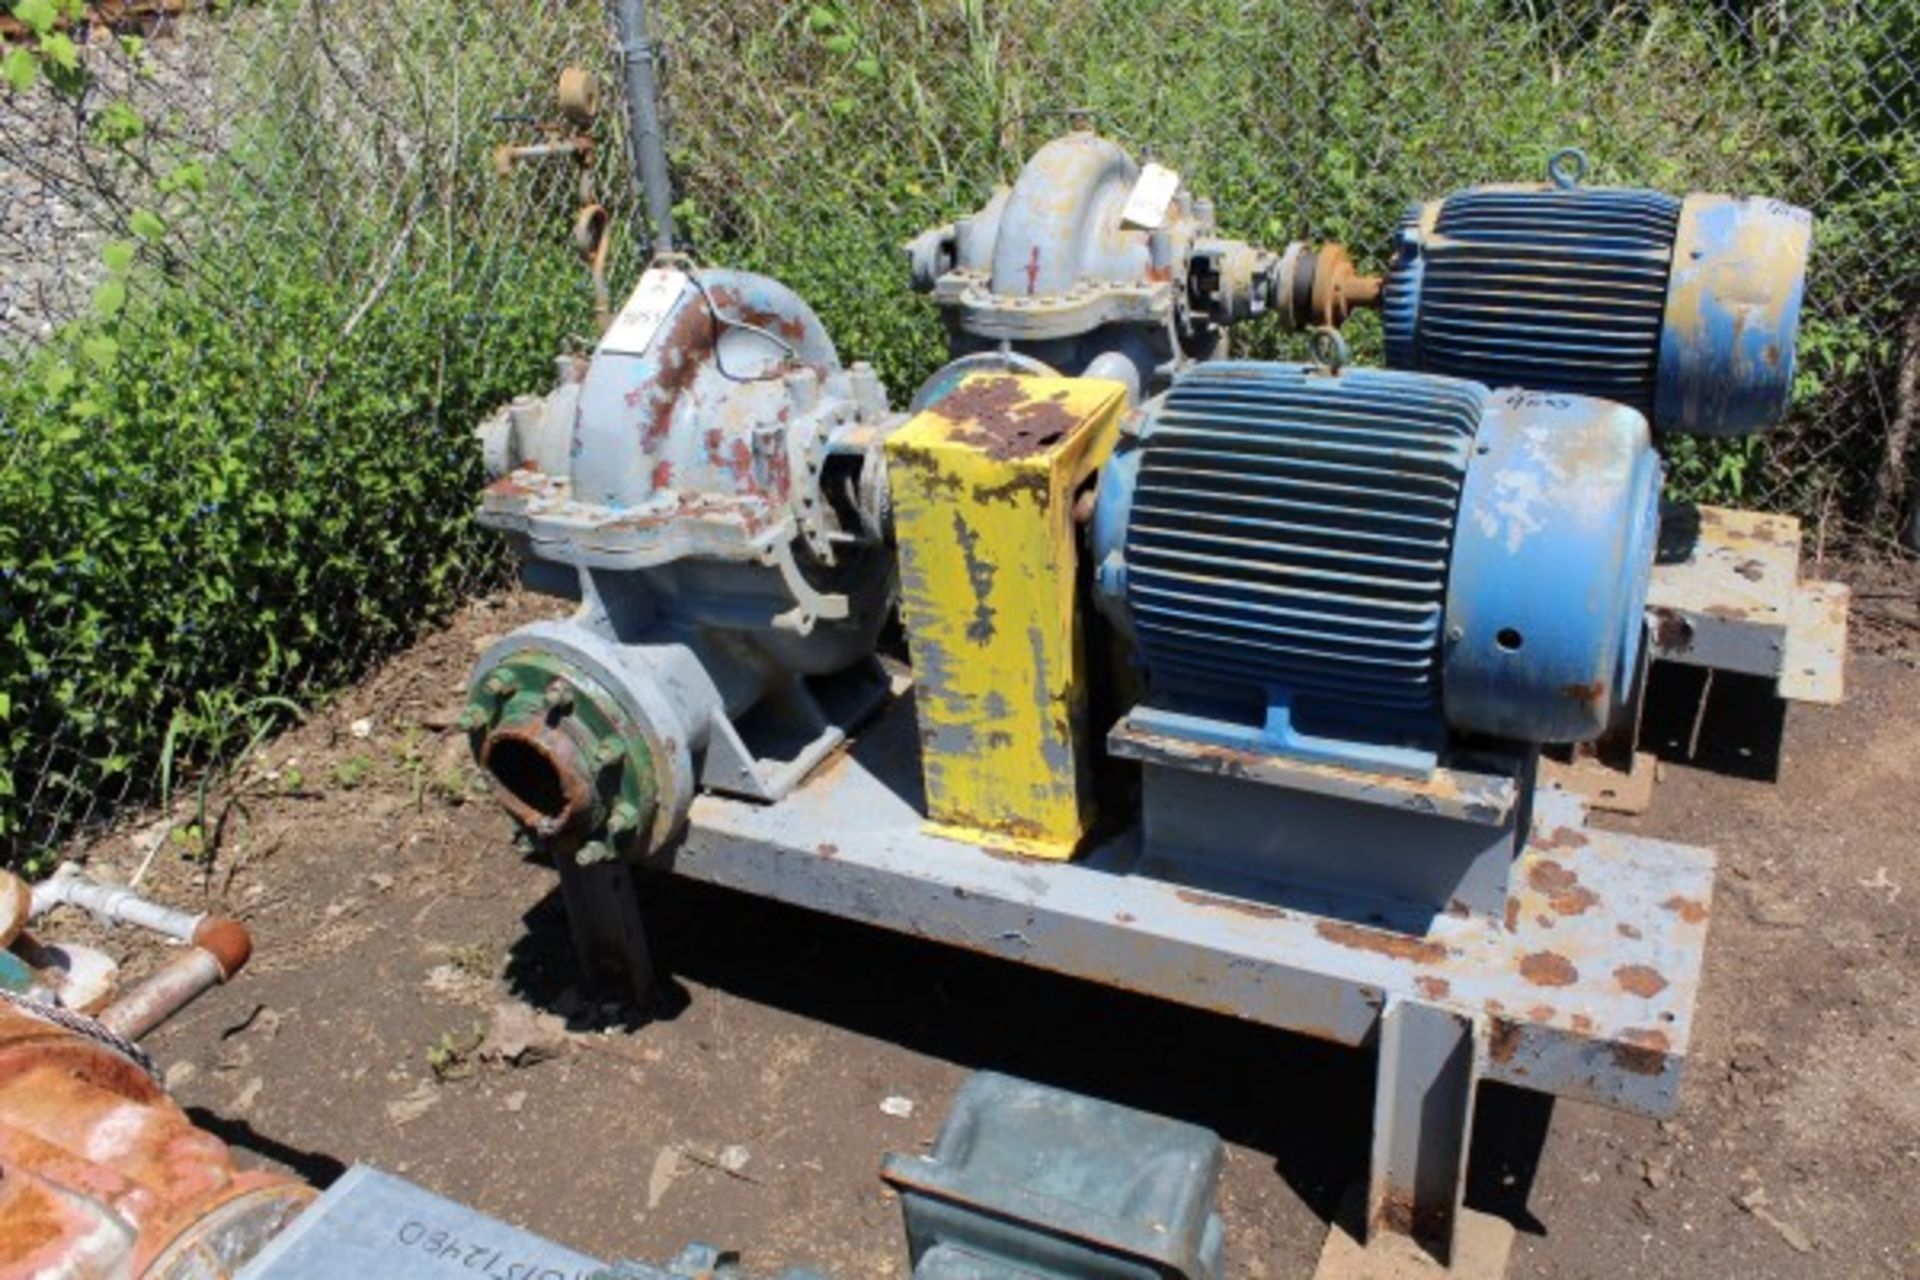 Coker 6012 Pump, 75 HP | Seller to load for $10 per lot or buyers may remove hand carry items by